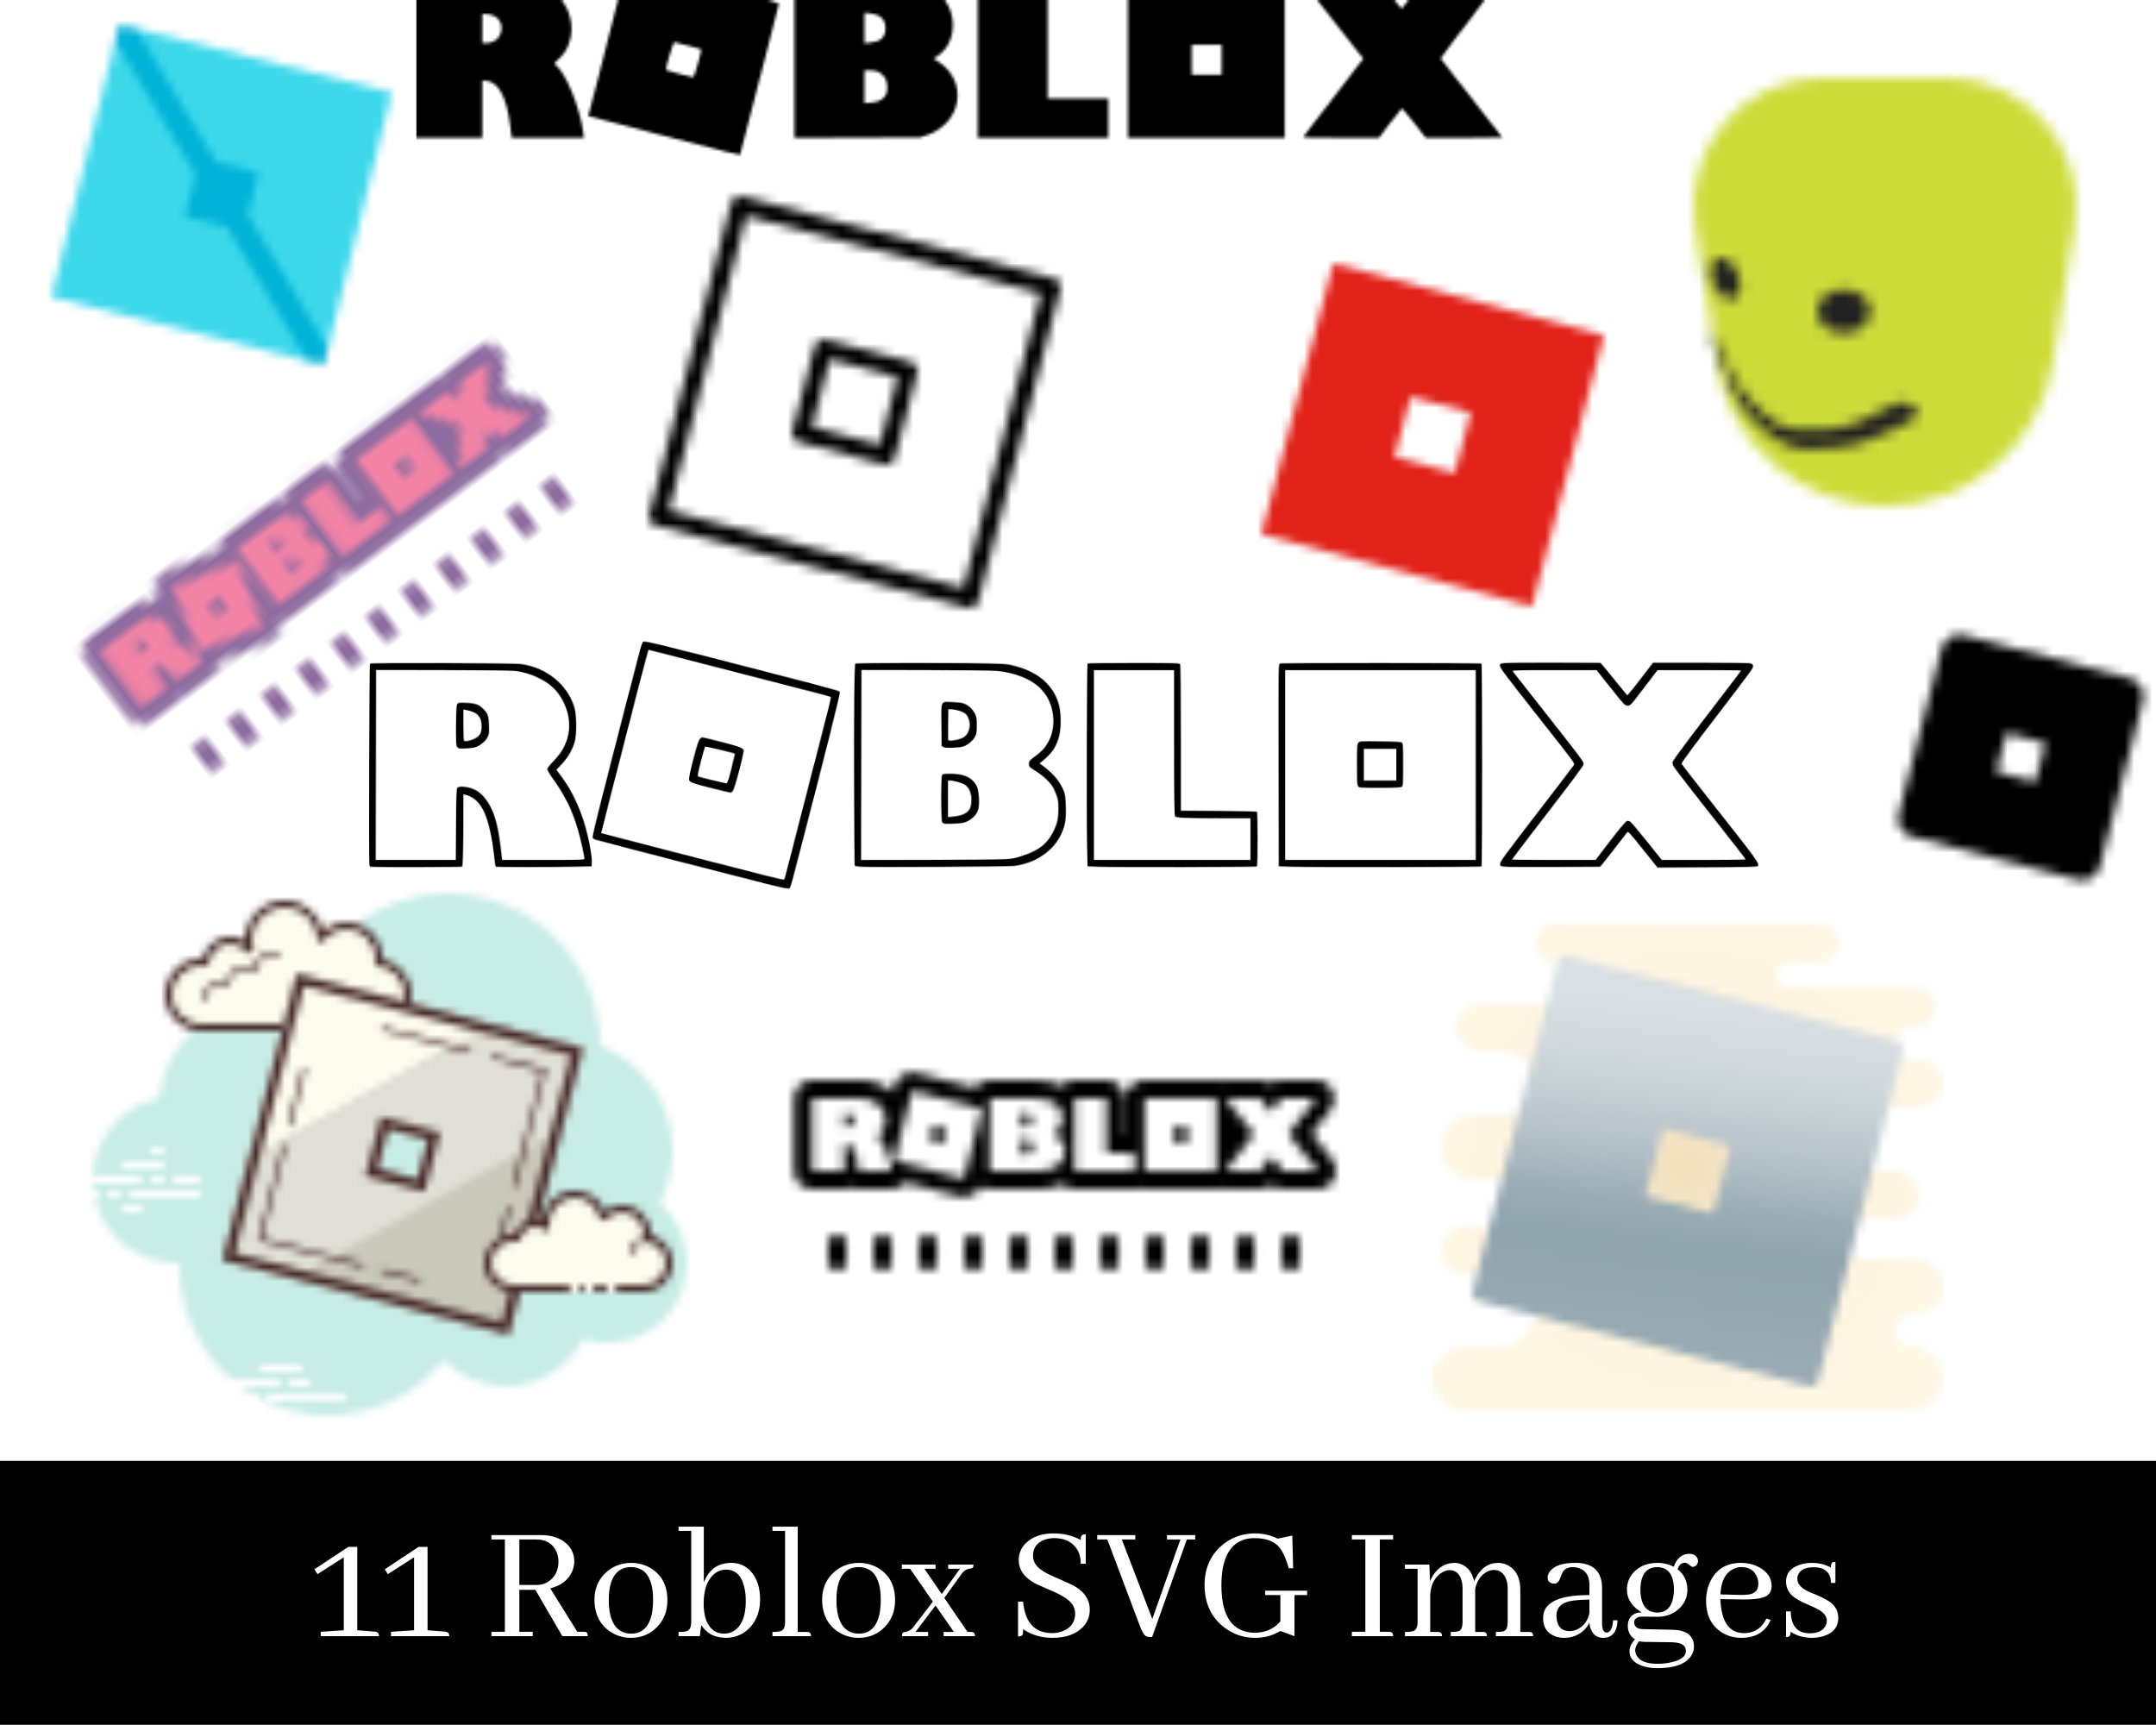 Roblox SVG, Roblox Logo, Roblox New Logo, Roblox PNG, Roblox Clipart,  Roblox Symbol, Roblox Font, Roblox Face PNG